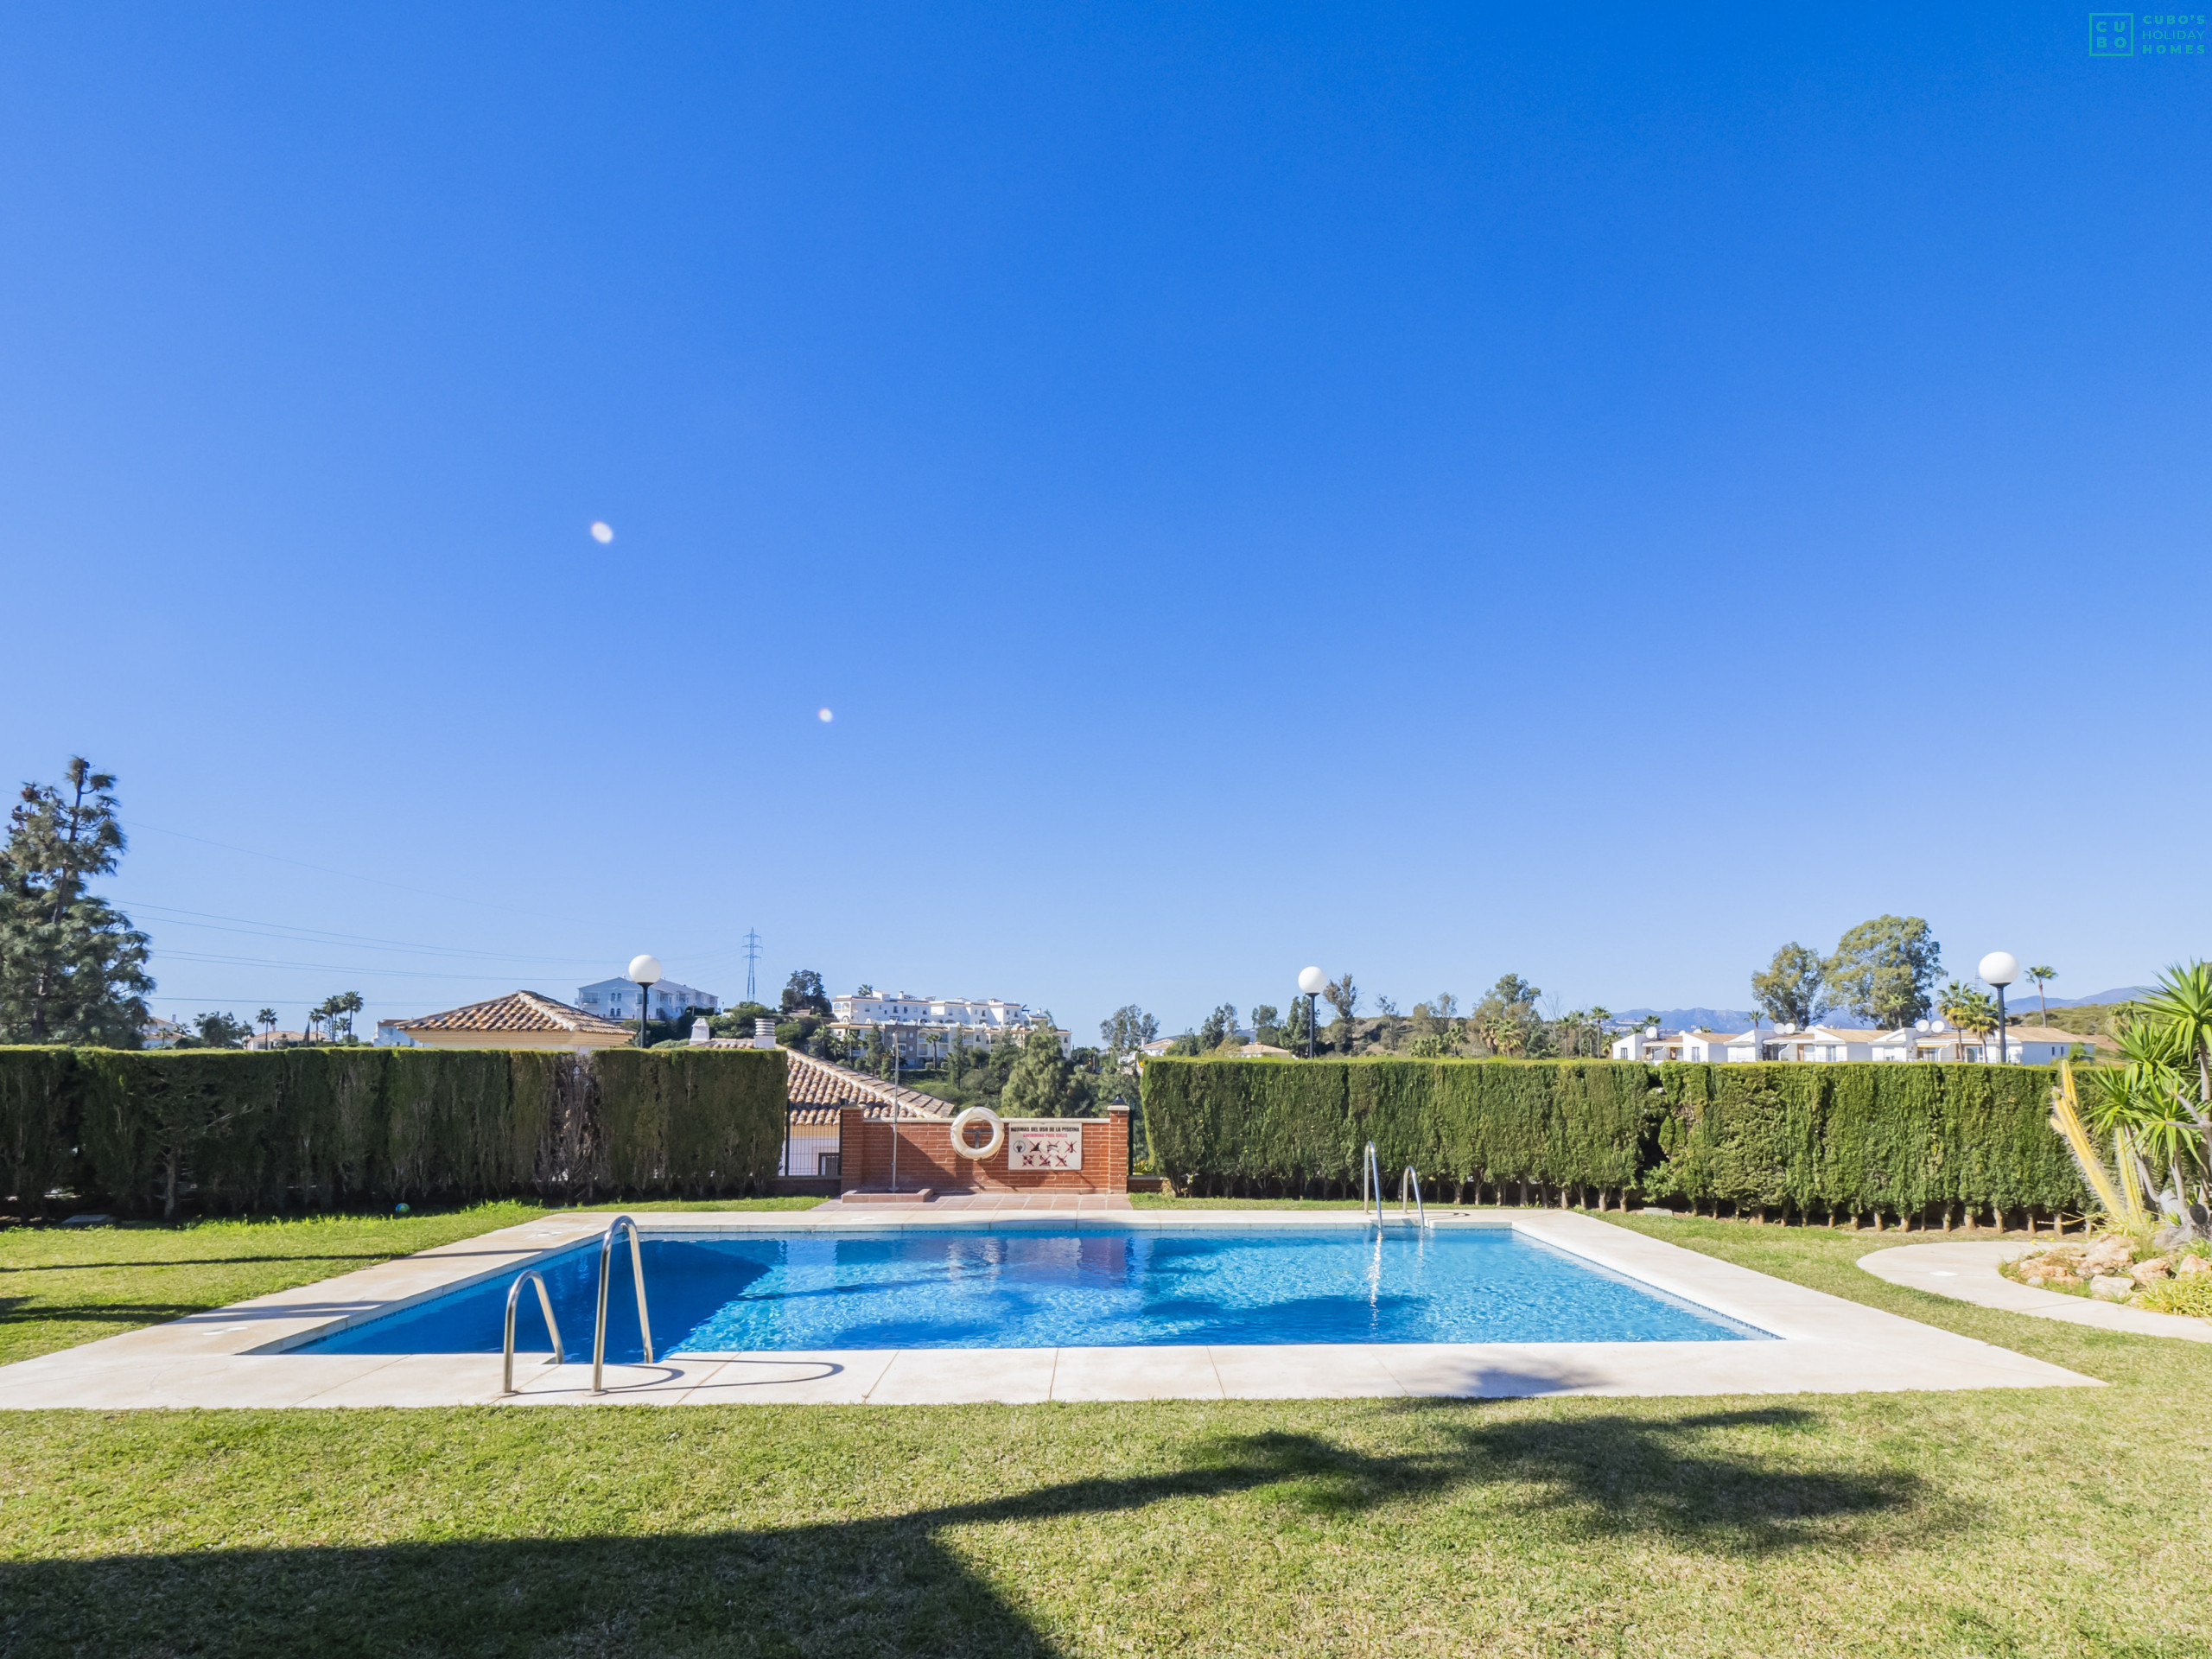  in Mijas Costa - Cubo's Chaparral Townhouse & Community Pool